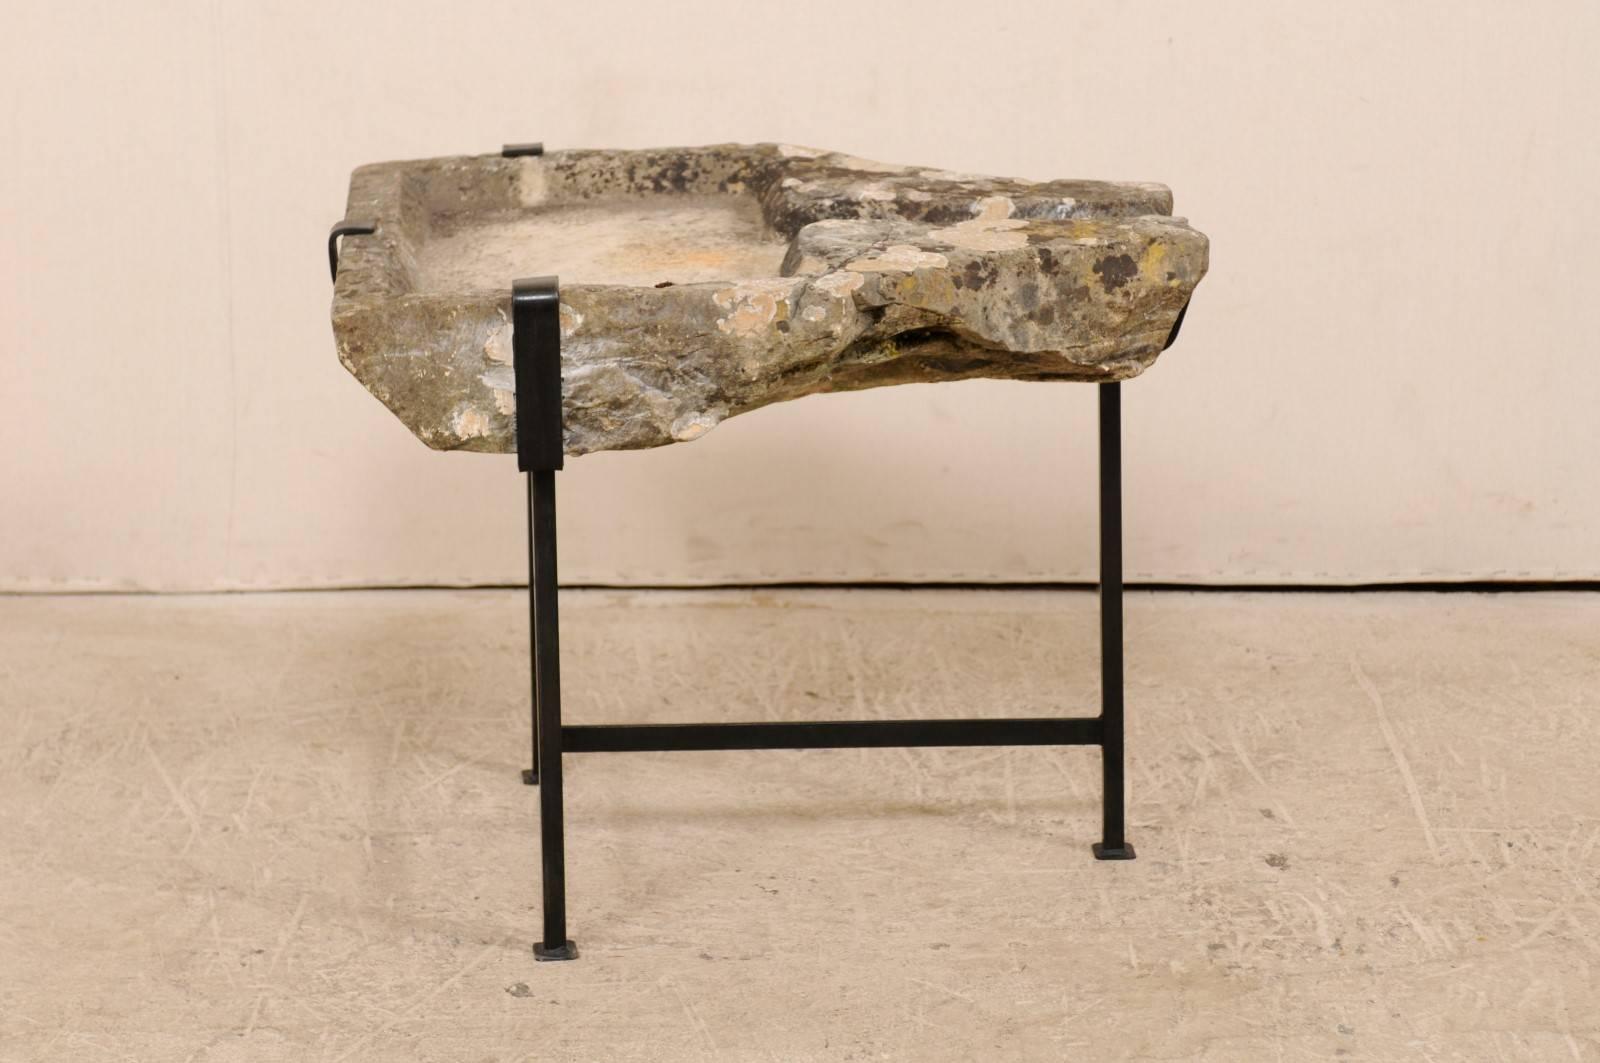 Rustic Early 19th Century French Stone Trough Coffee Table on Custom Black Iron Base